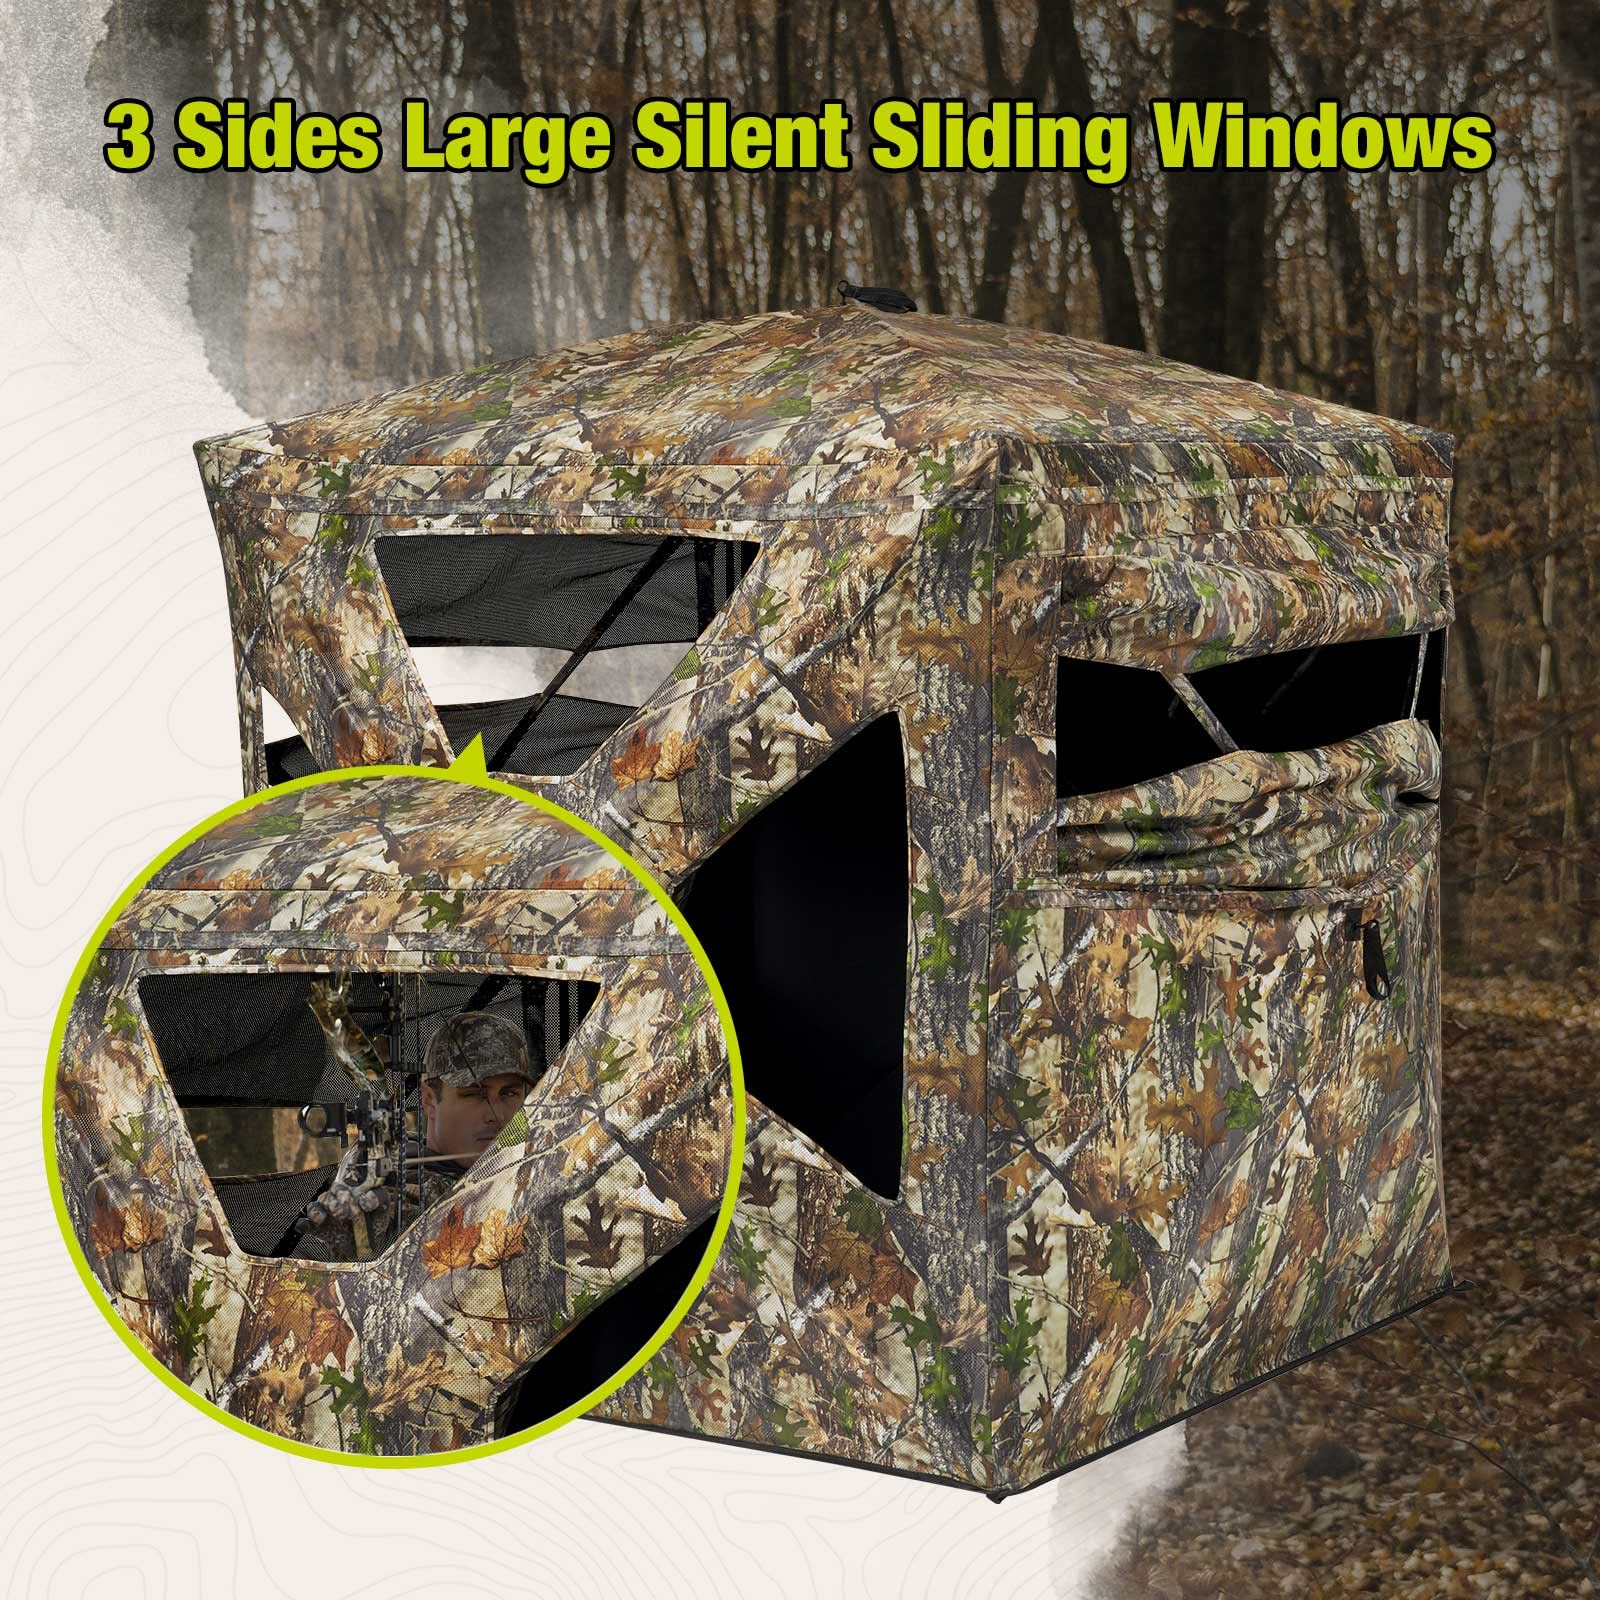 TIDEWE Hunting Blind 270°See Through with Silent Magnetic Door & Sliding Windows, 2-3 Person Pop Up Ground Blind with Carrying Bag, Portable Durable Hunting Tent for Deer & Turkey Hunting